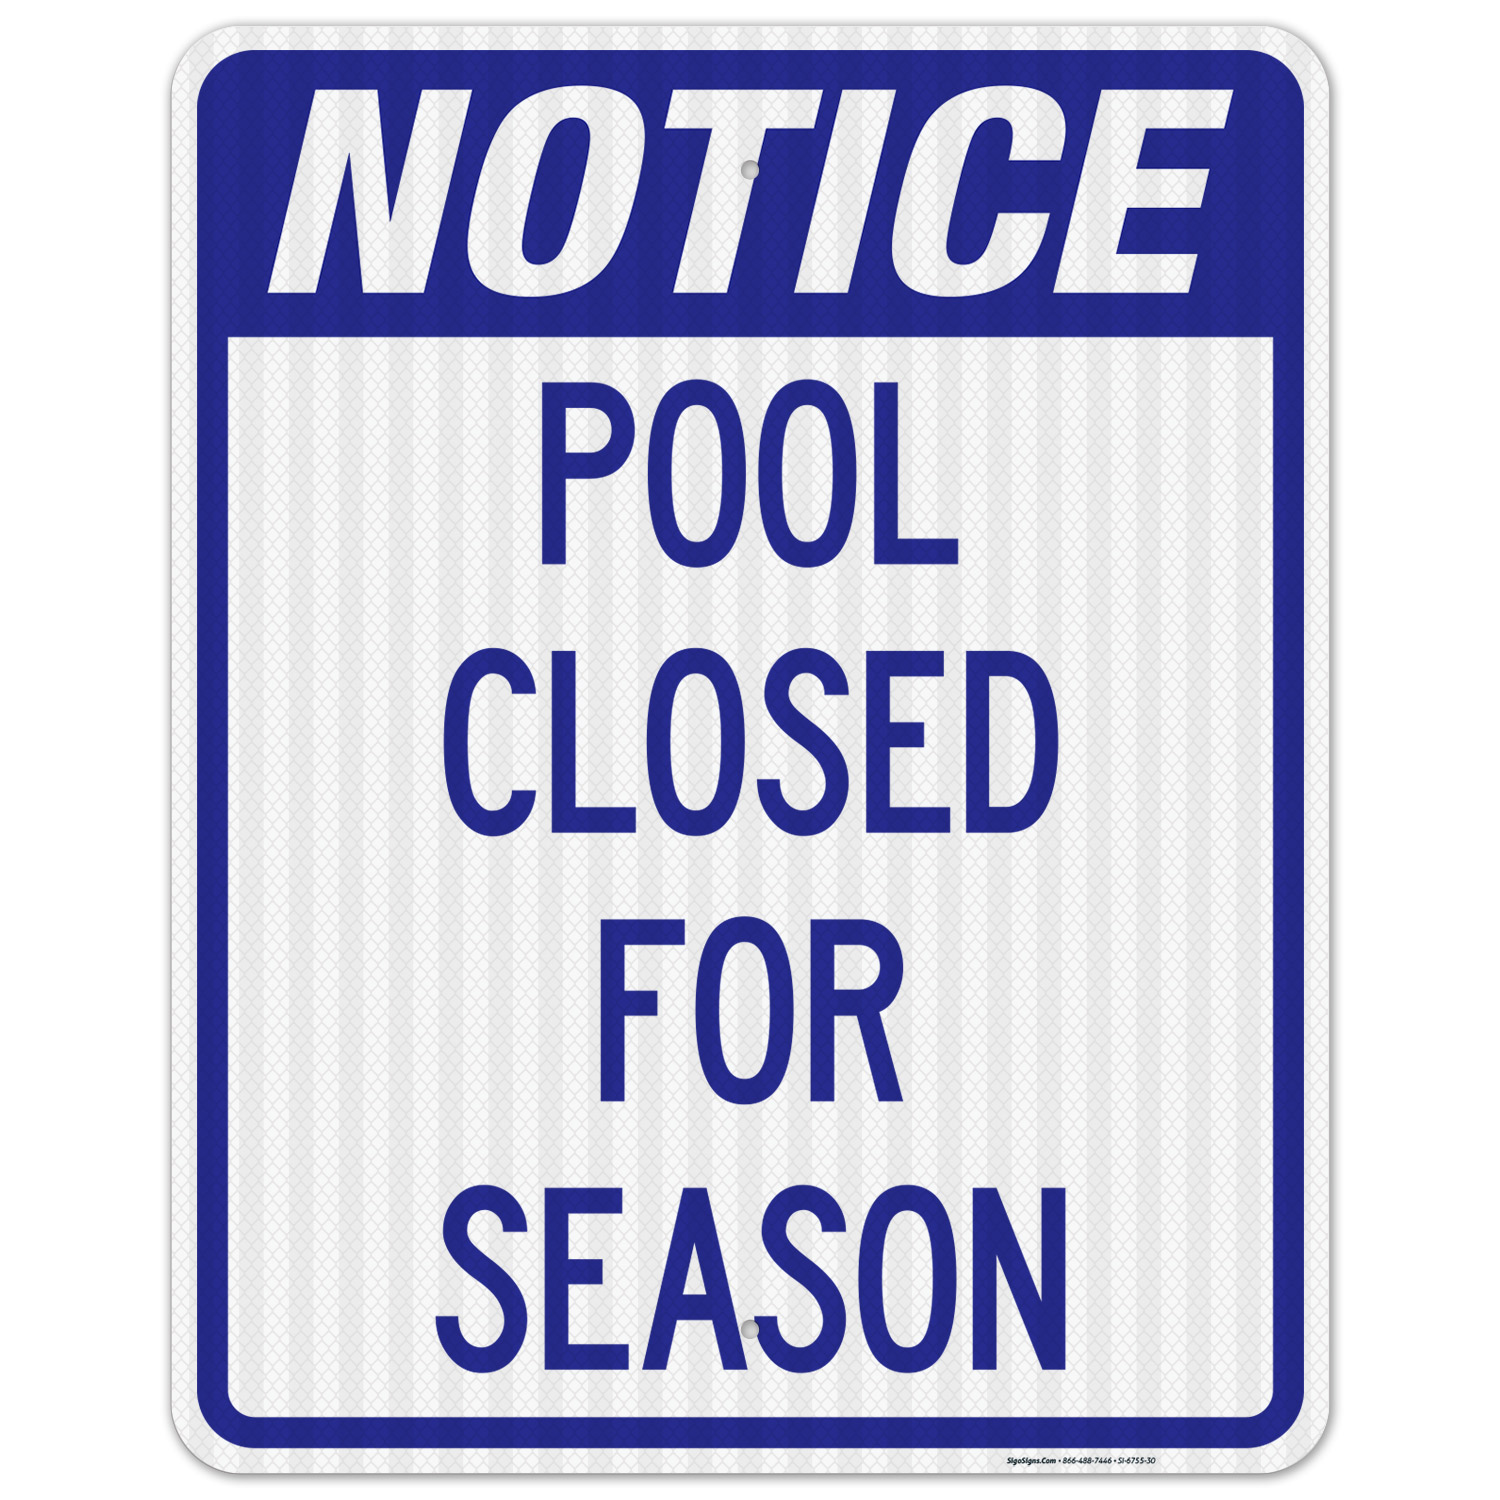 Notice Pool Closed For Season Sign, Pool Sign, 24x36 Corrugated Plastic - image 1 of 1